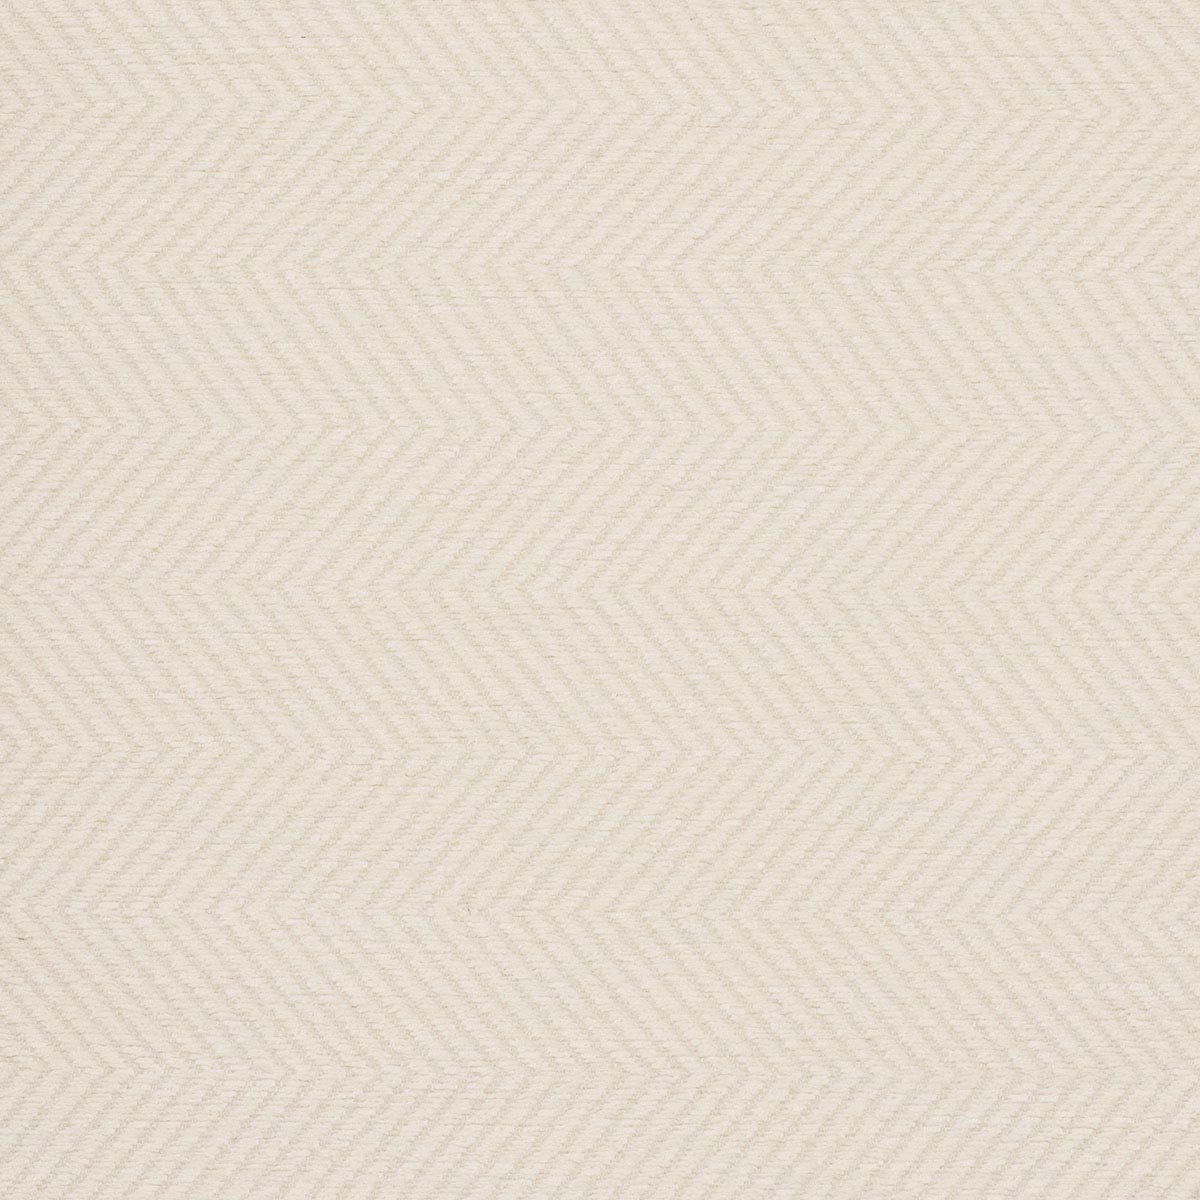 Purchase Mag Fabric Pattern 10537 Insideout Kenzie Natural Fabric